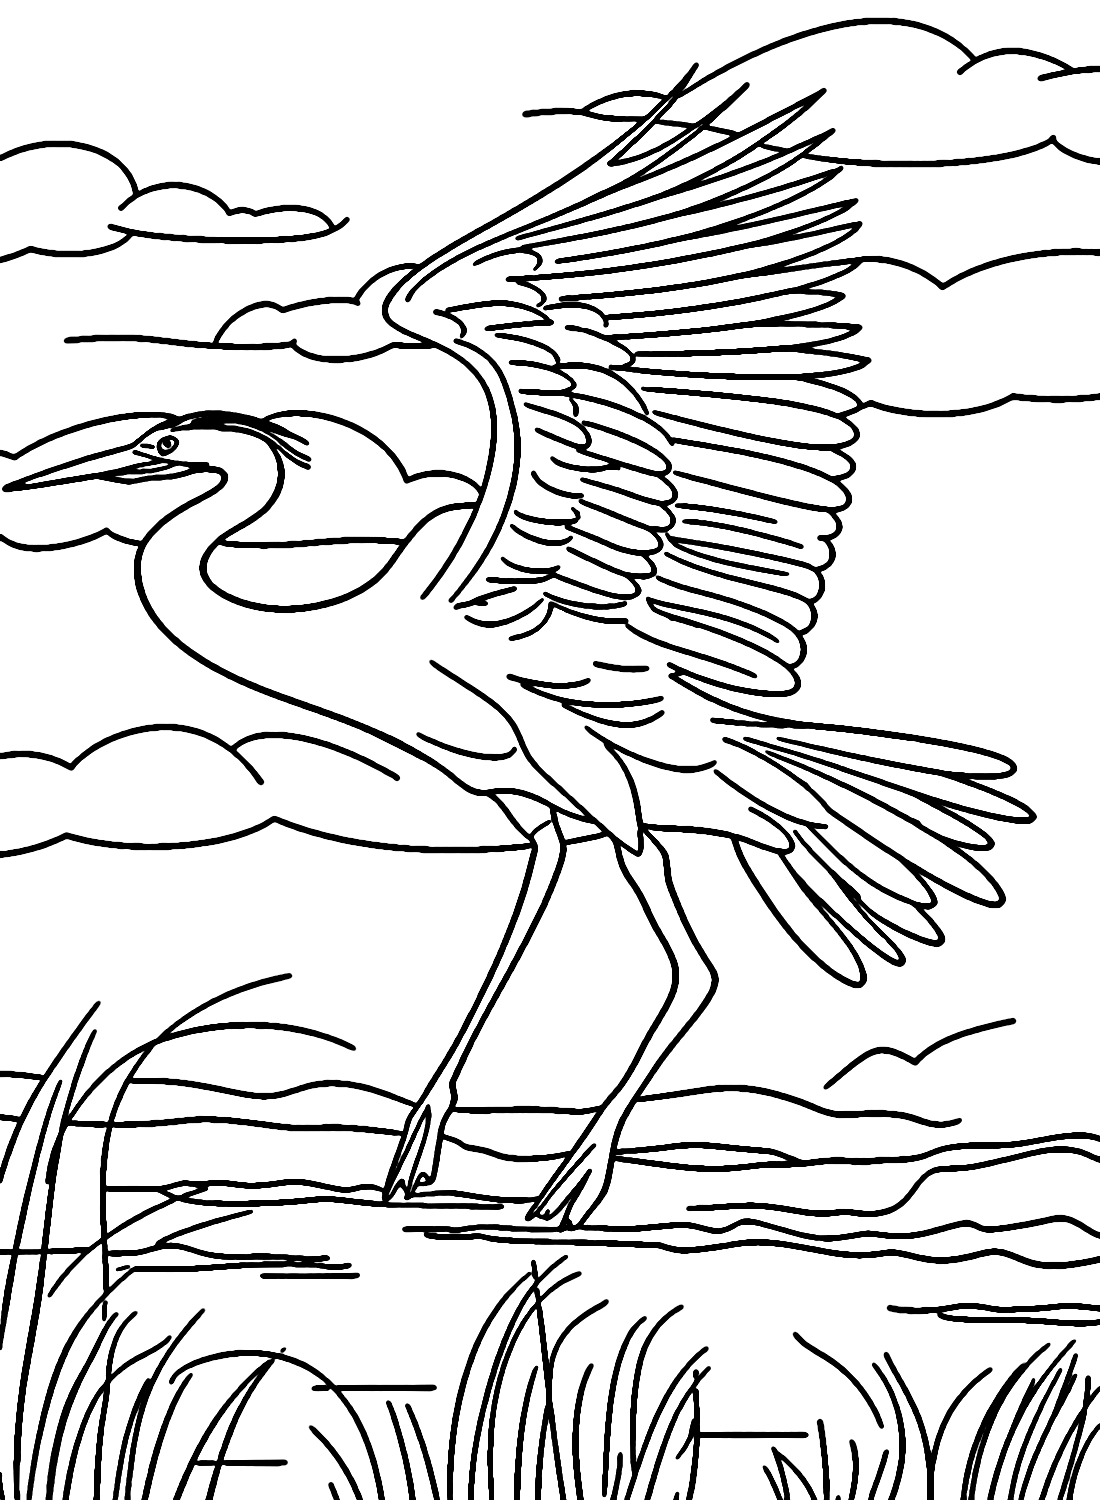 Heron with Nature Coloring Pages - Heron Coloring Pages - Coloring ...